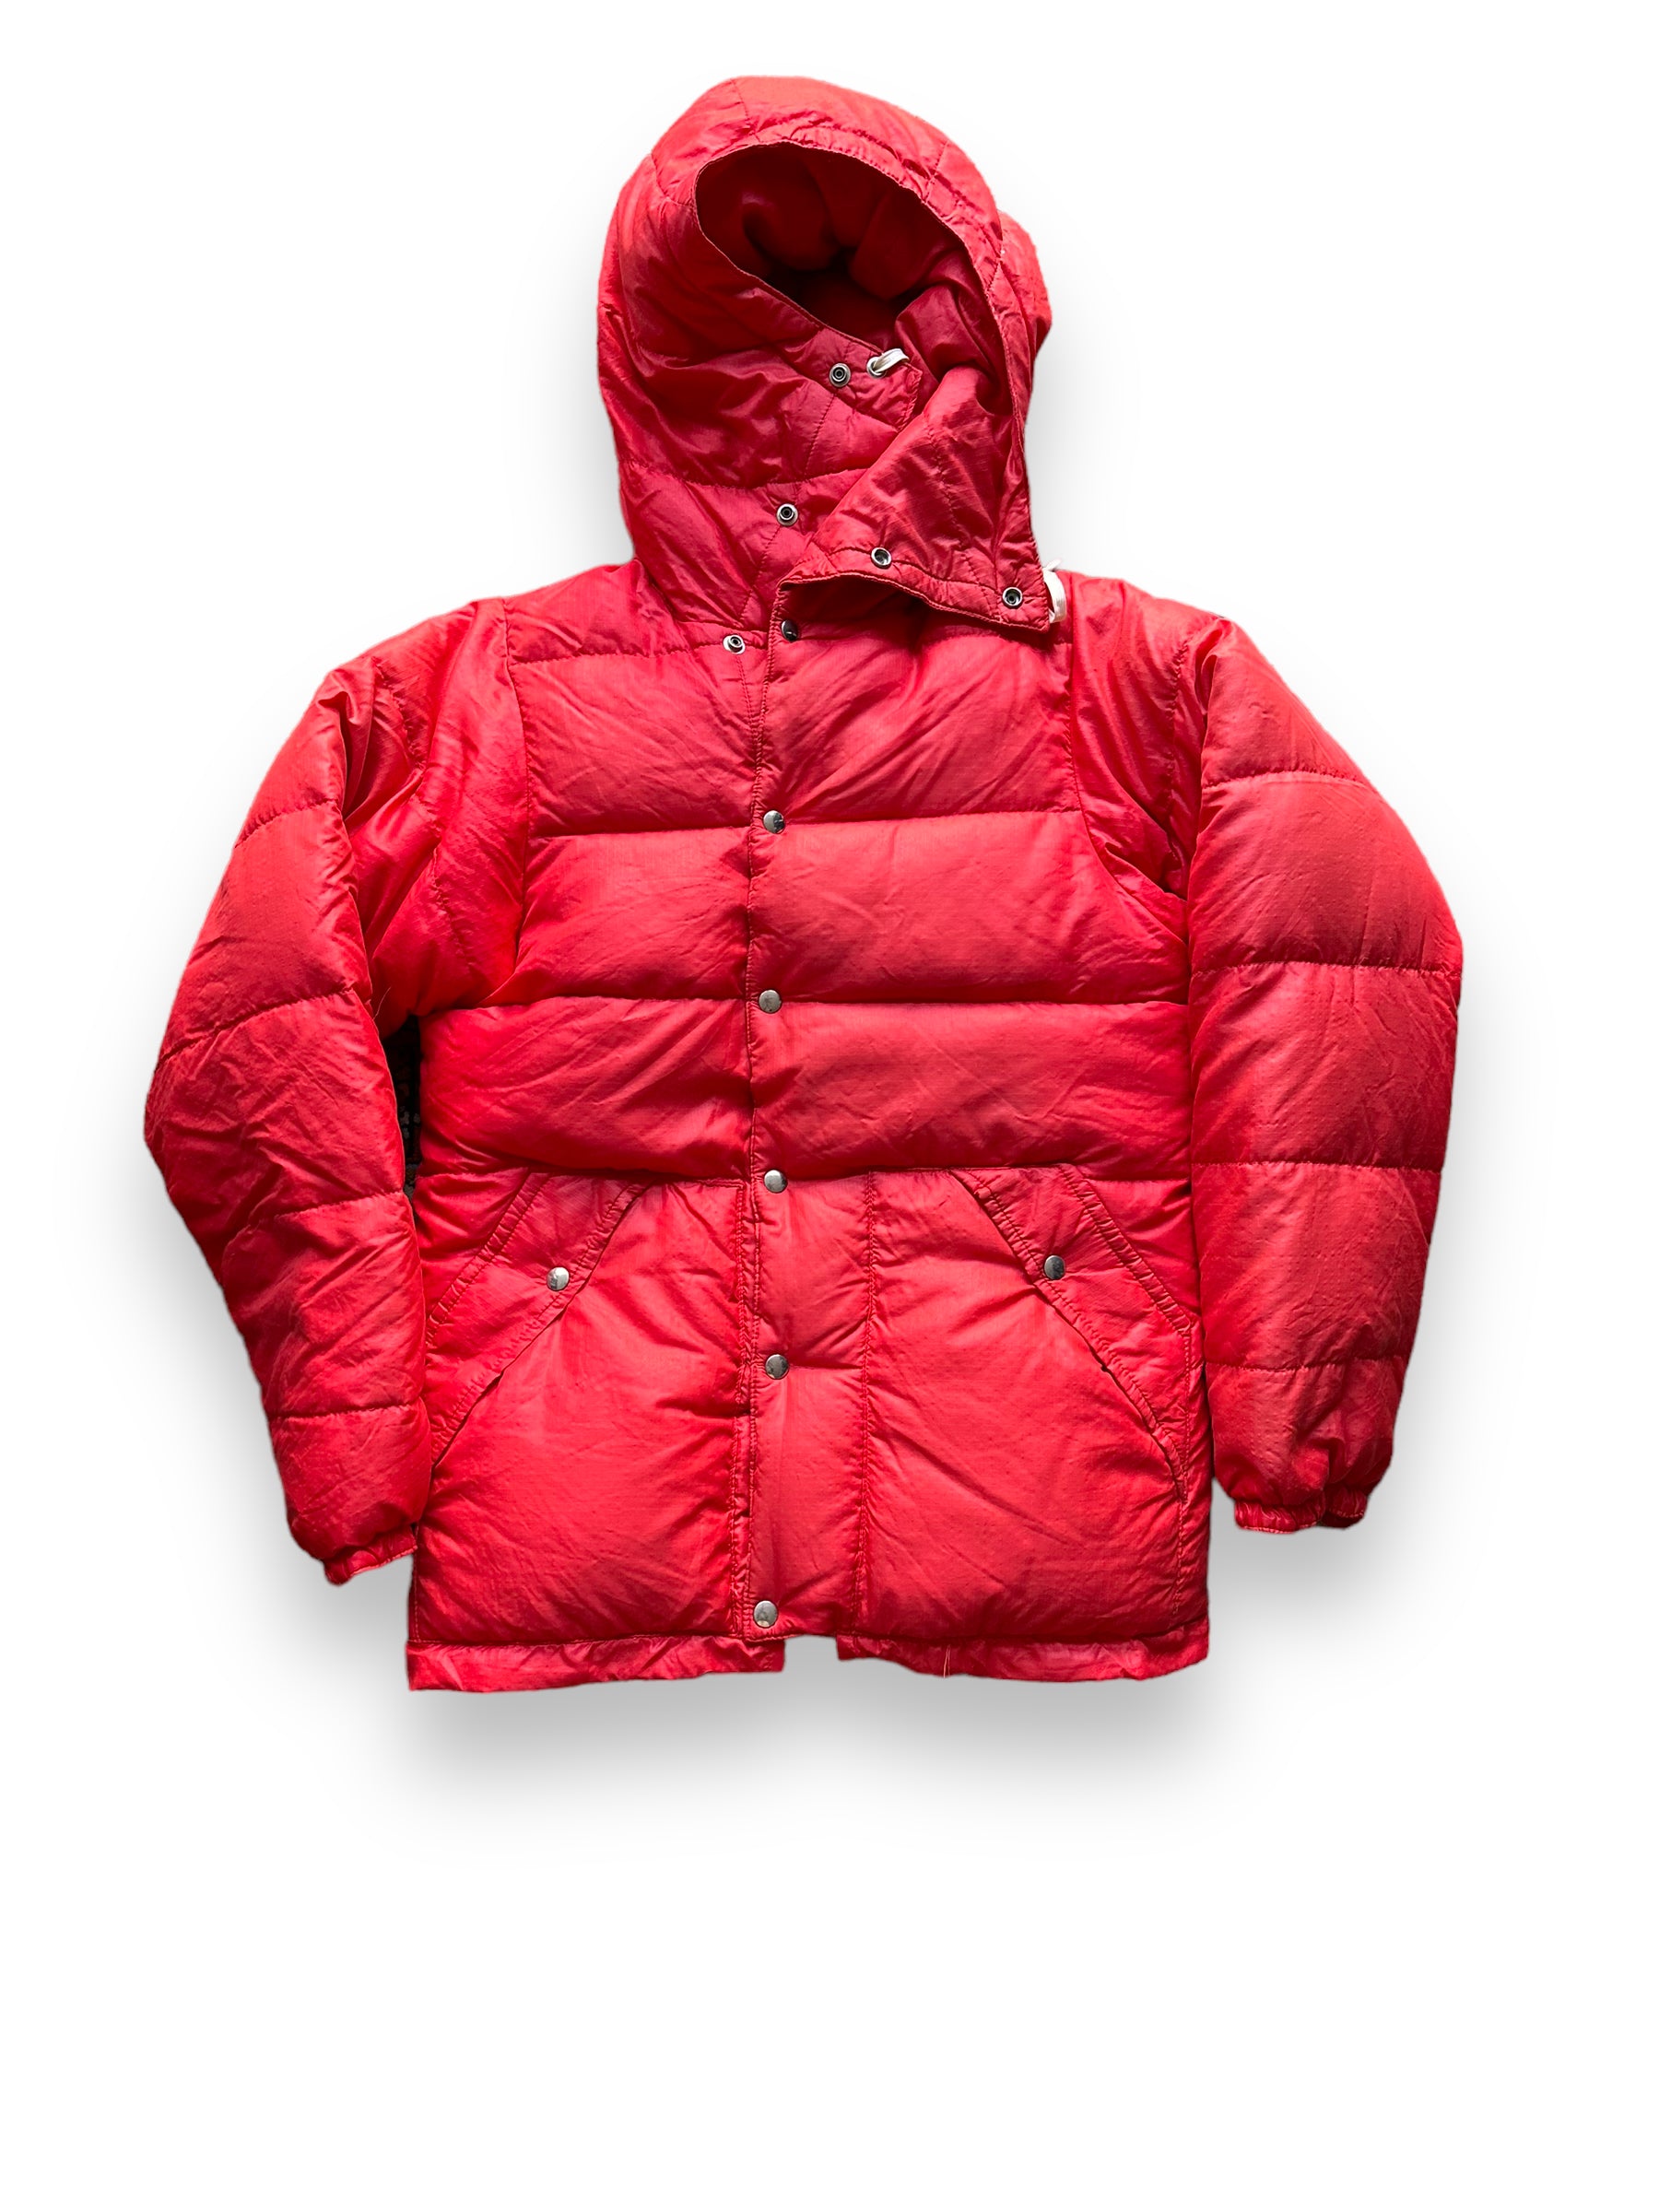 Front View of Vintage Red REI Goose Down Puffer Jacket SZ XS | Vintage Puffer Jacket Seattle | Barn Owl Vintage Seattle